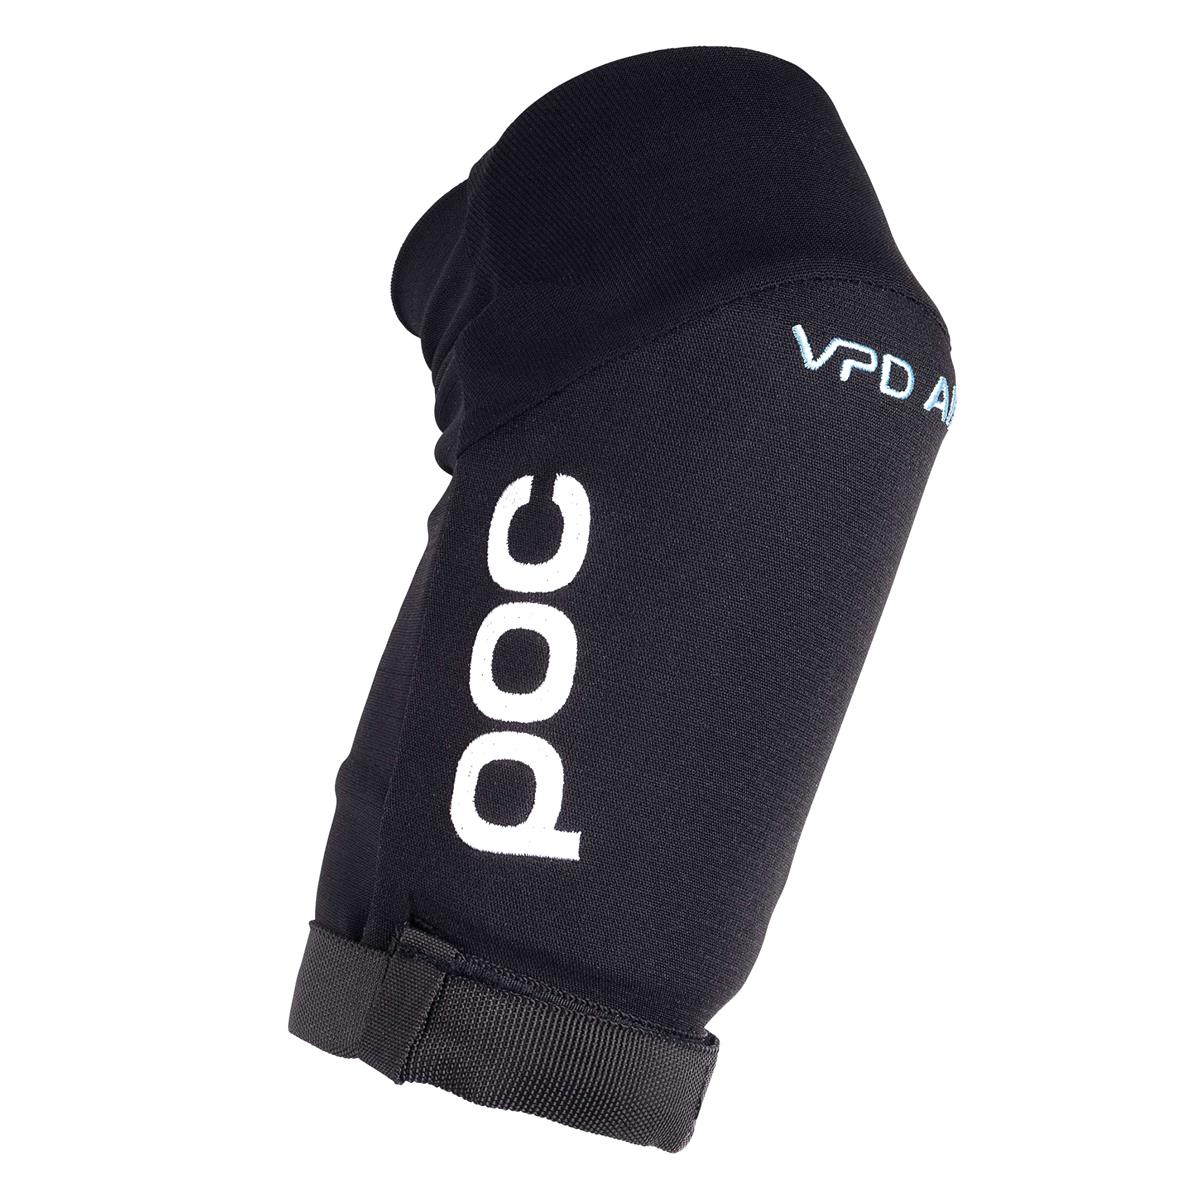 Joint VPD Air Elbow pads black size S